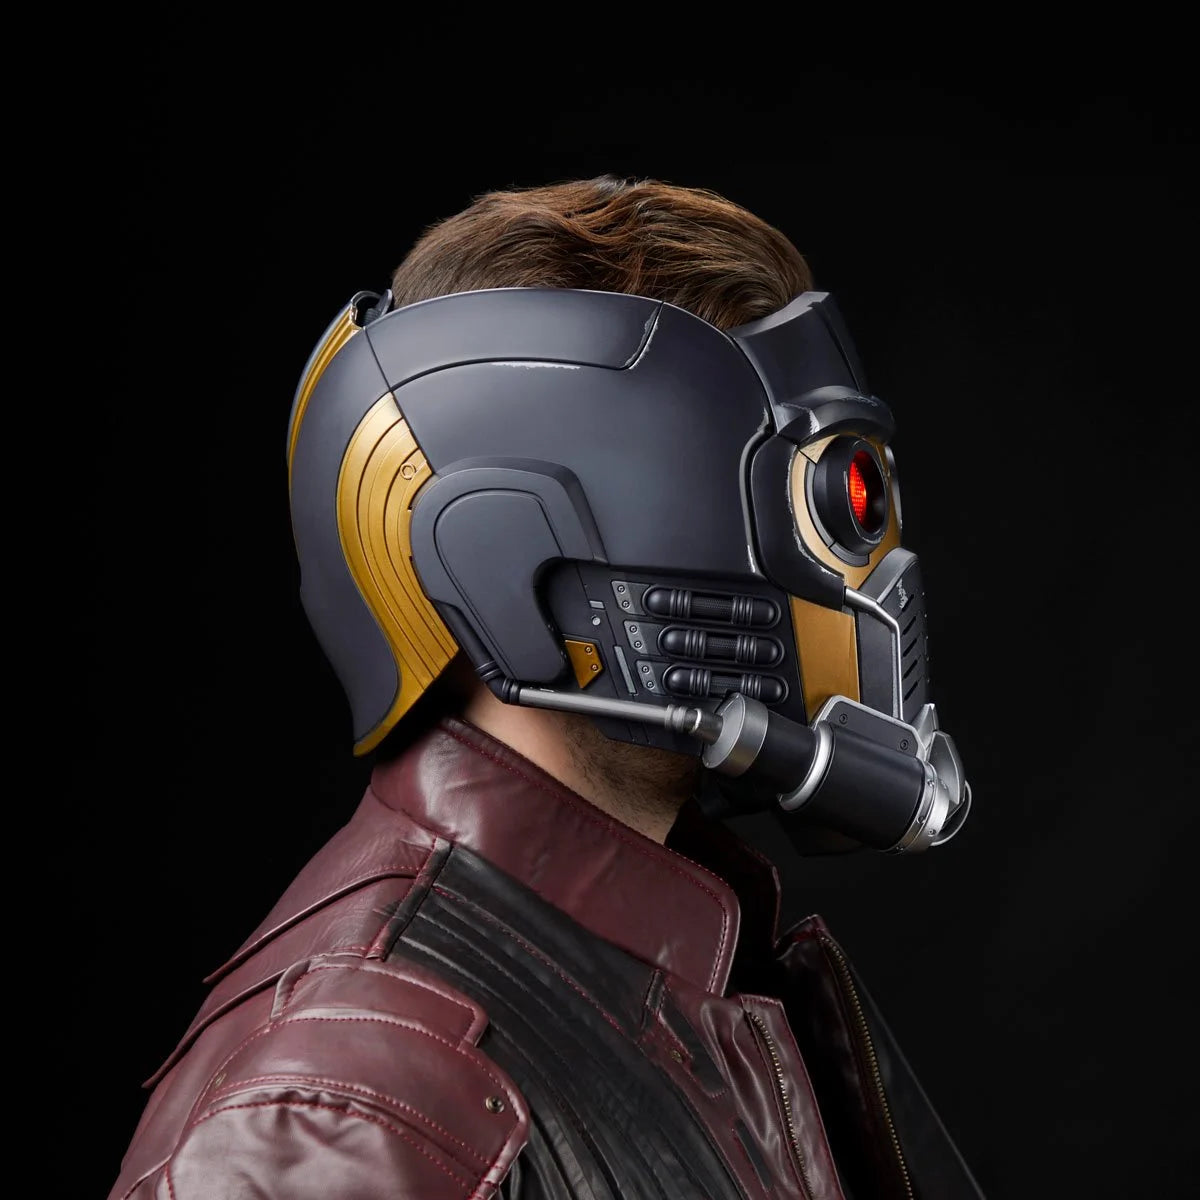 Marvel Legends Series Star-Lord Premium Electronic Roleplay Helmet with Light and Sound FX, Guardians of The Galaxy Adult Roleplay Gear - Heretoserveyou